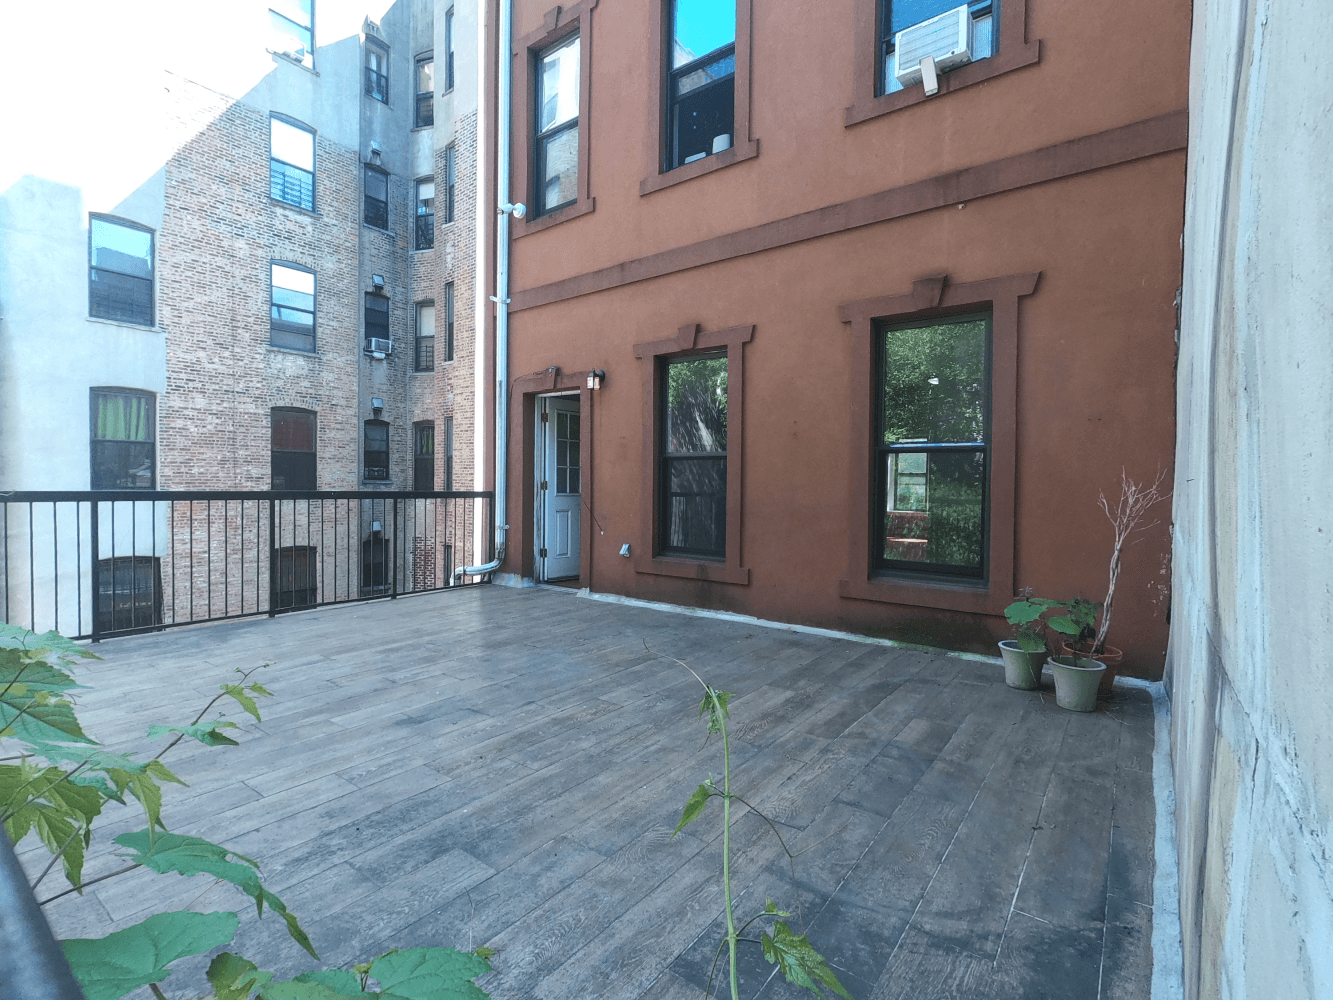 Very bright 2 bed 1 full bath, second full floor of a brownstone.